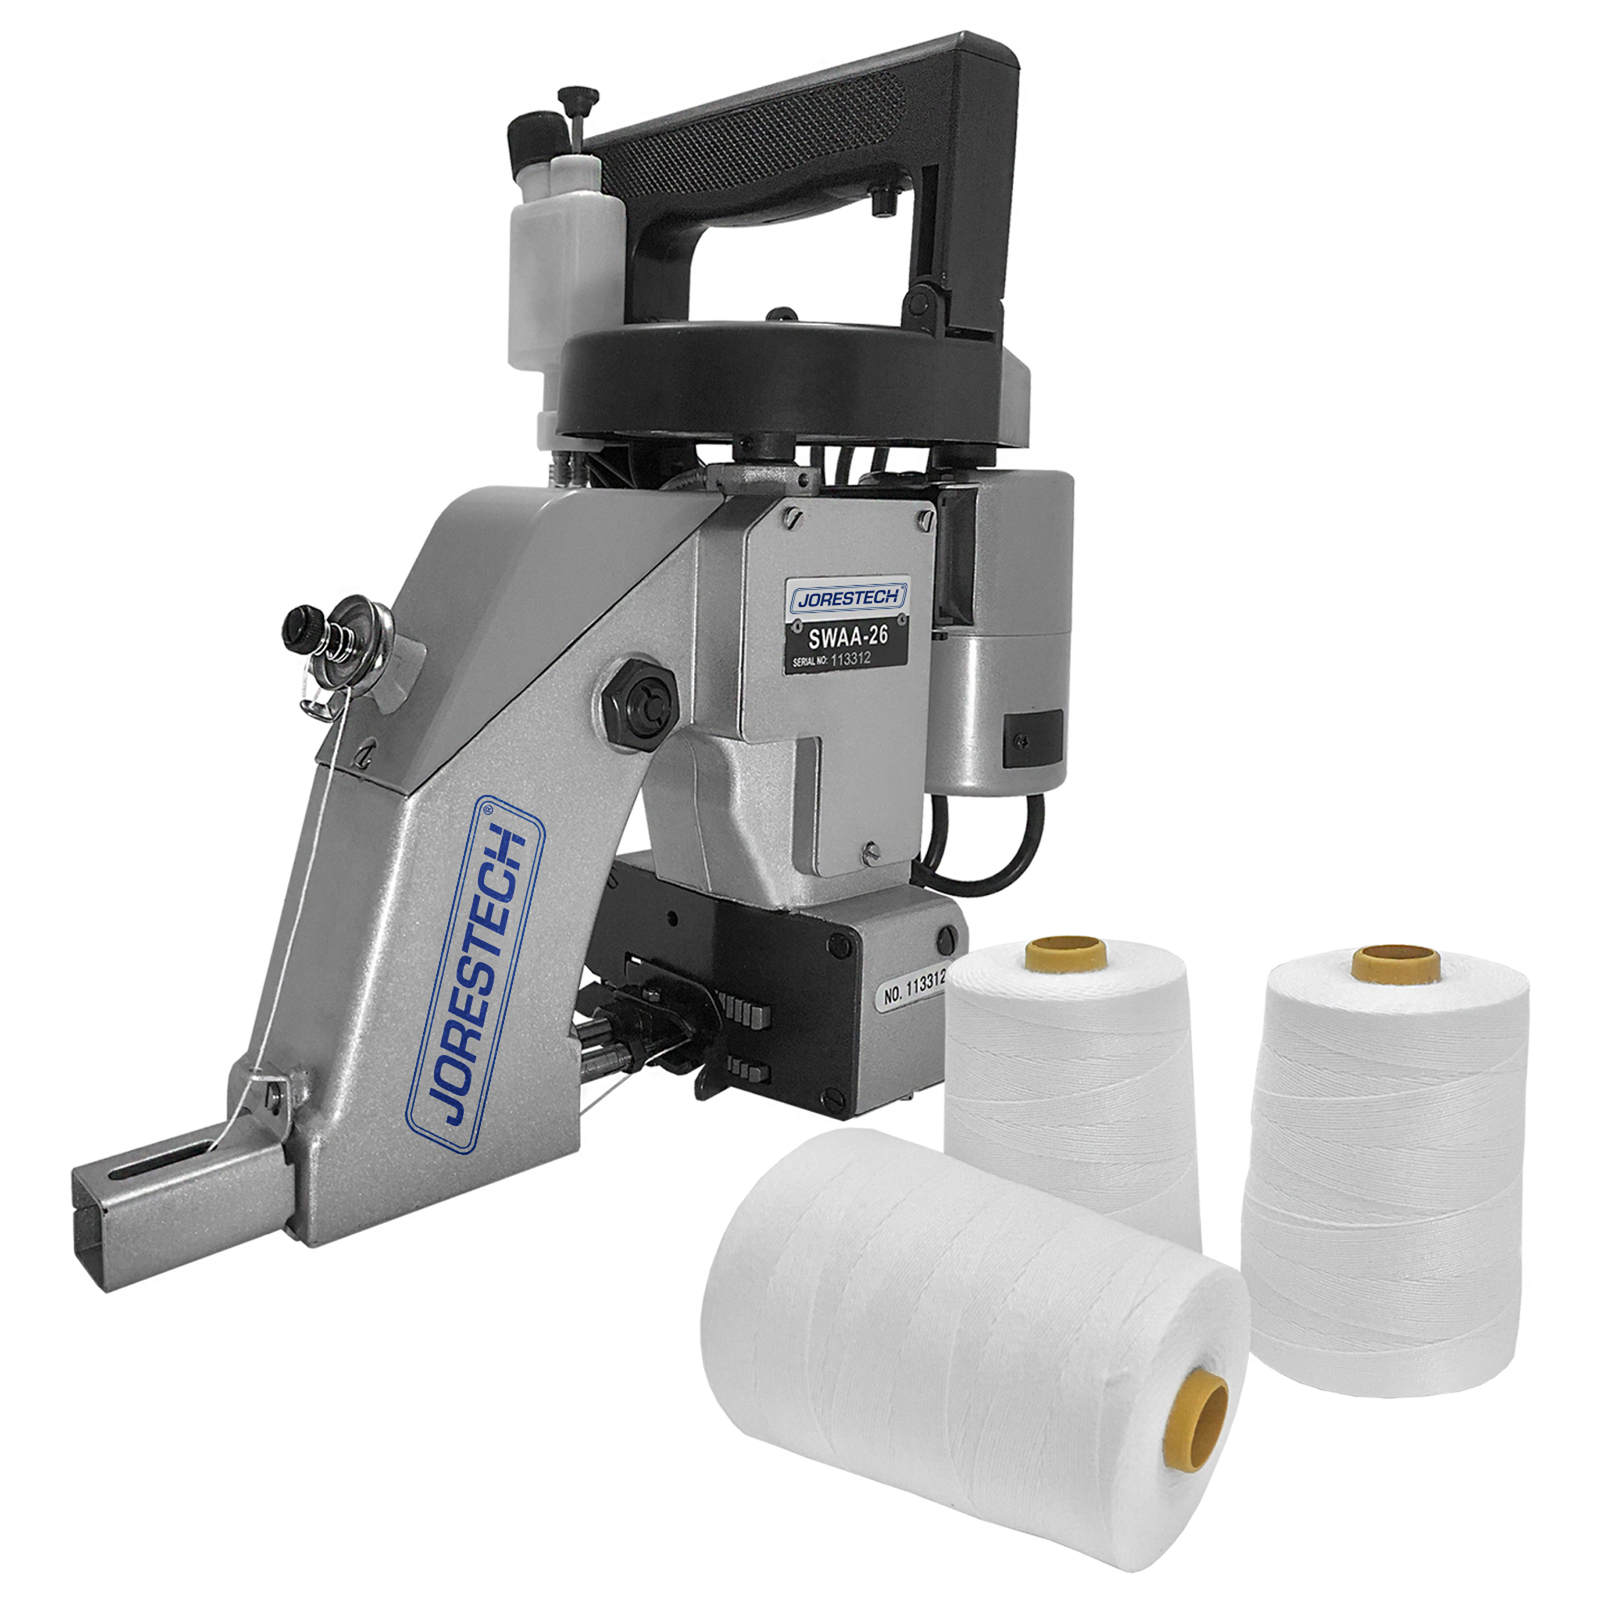 Portable steel electric bag sewing machine with black handle and blue JORES TECHNOLOGIES® outline logo shown next to 3 thread rolls